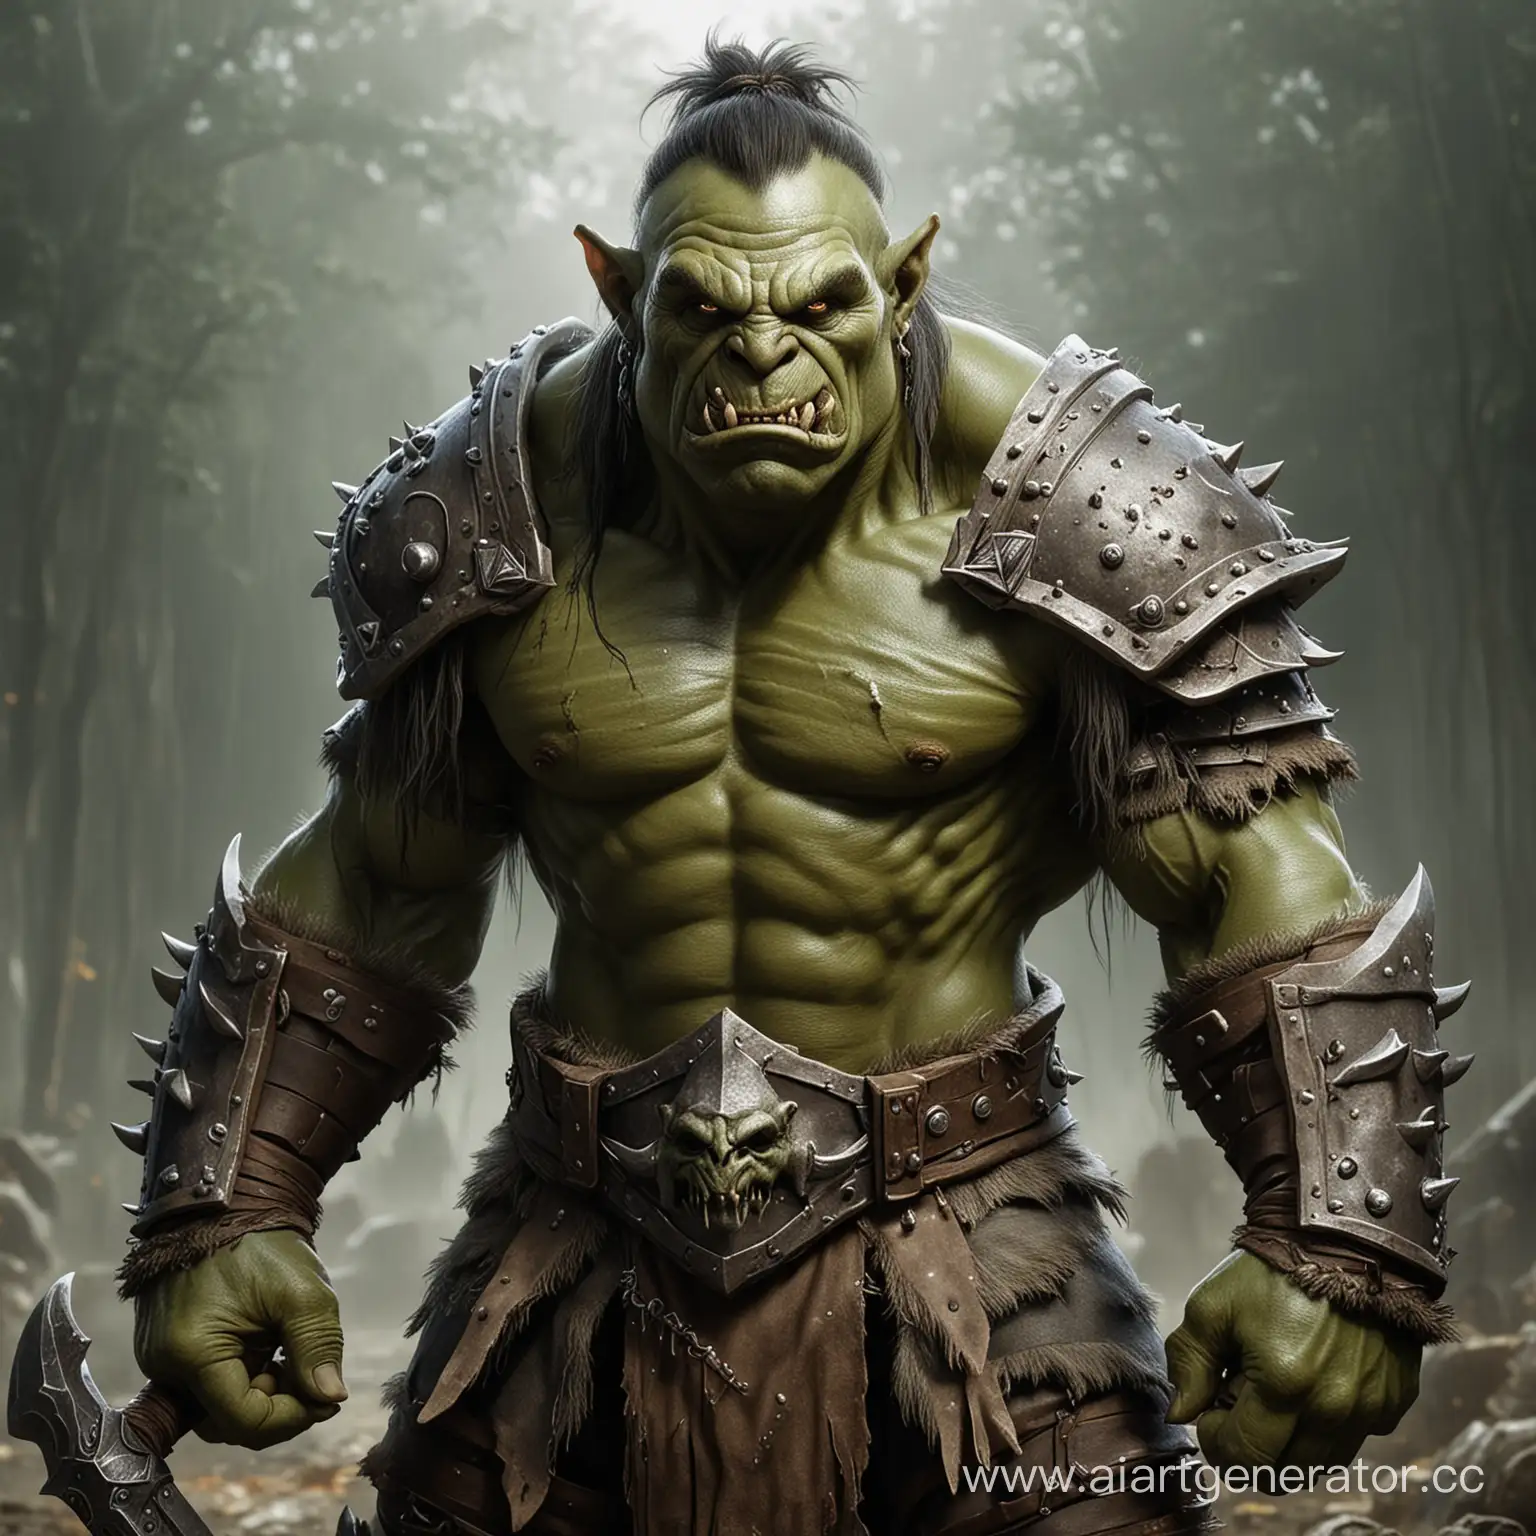 Kind-and-Strong-Green-Orc-Warrior-in-Battle